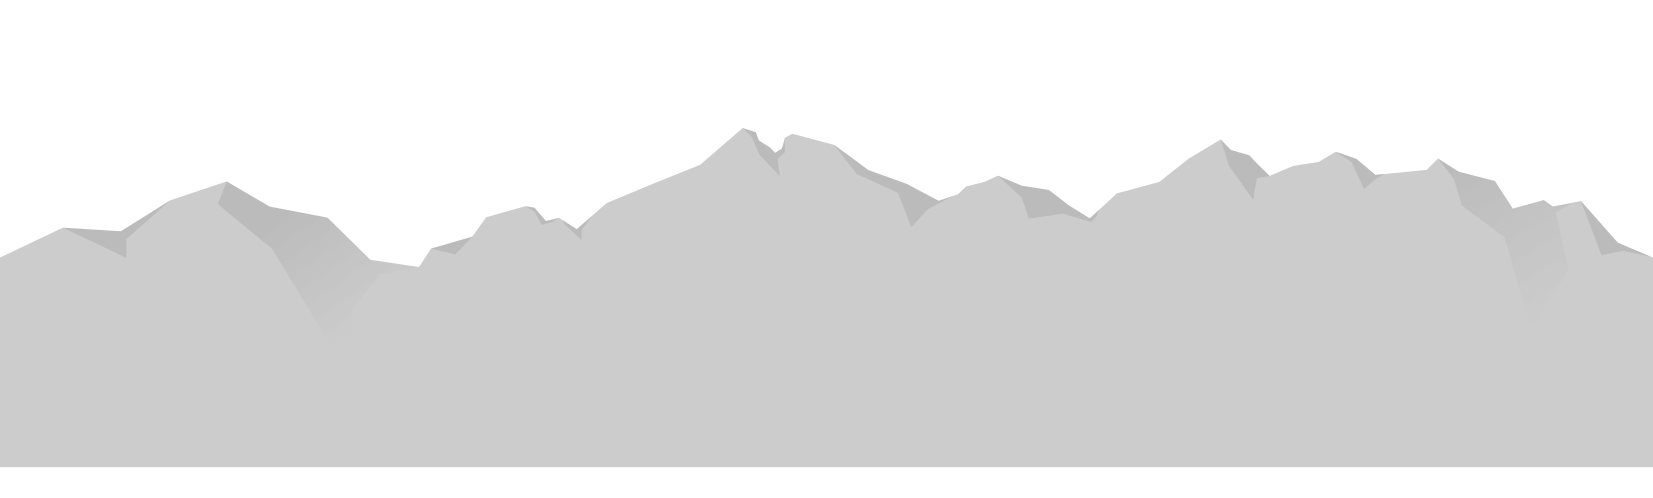 slate_mountains_front.png